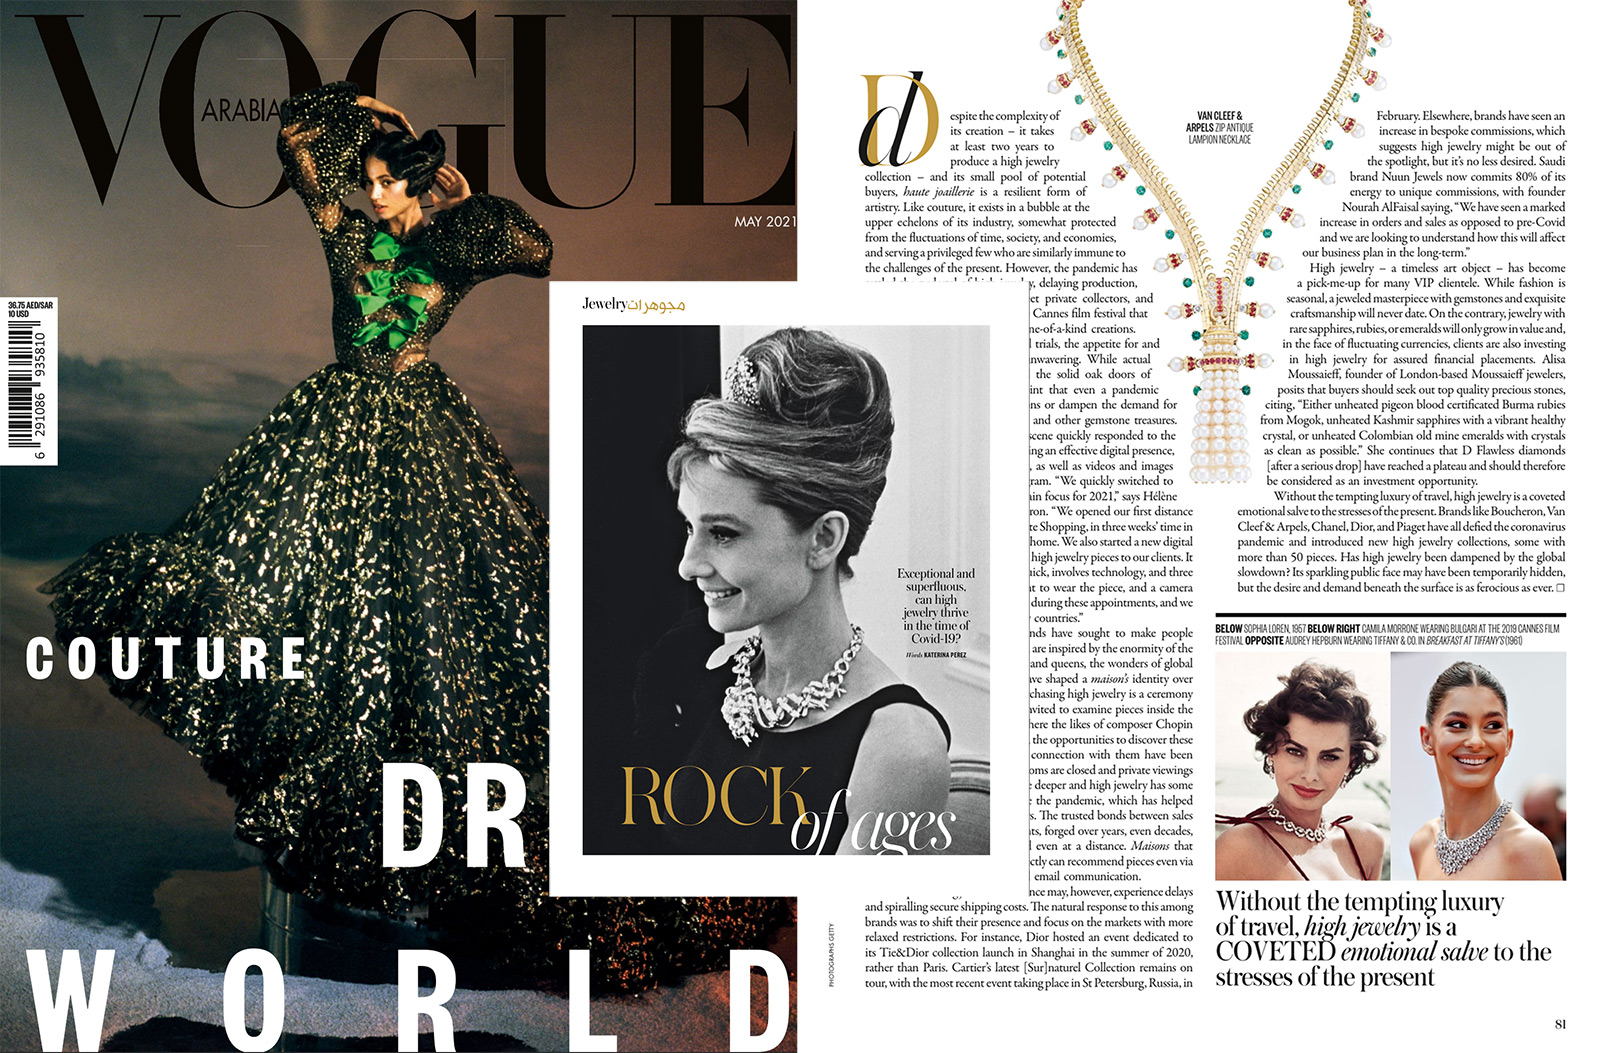 Vogue Arabia asked me to dive deeper into the world of High Jewellery during the COVID-19 pandemic for a recent issue